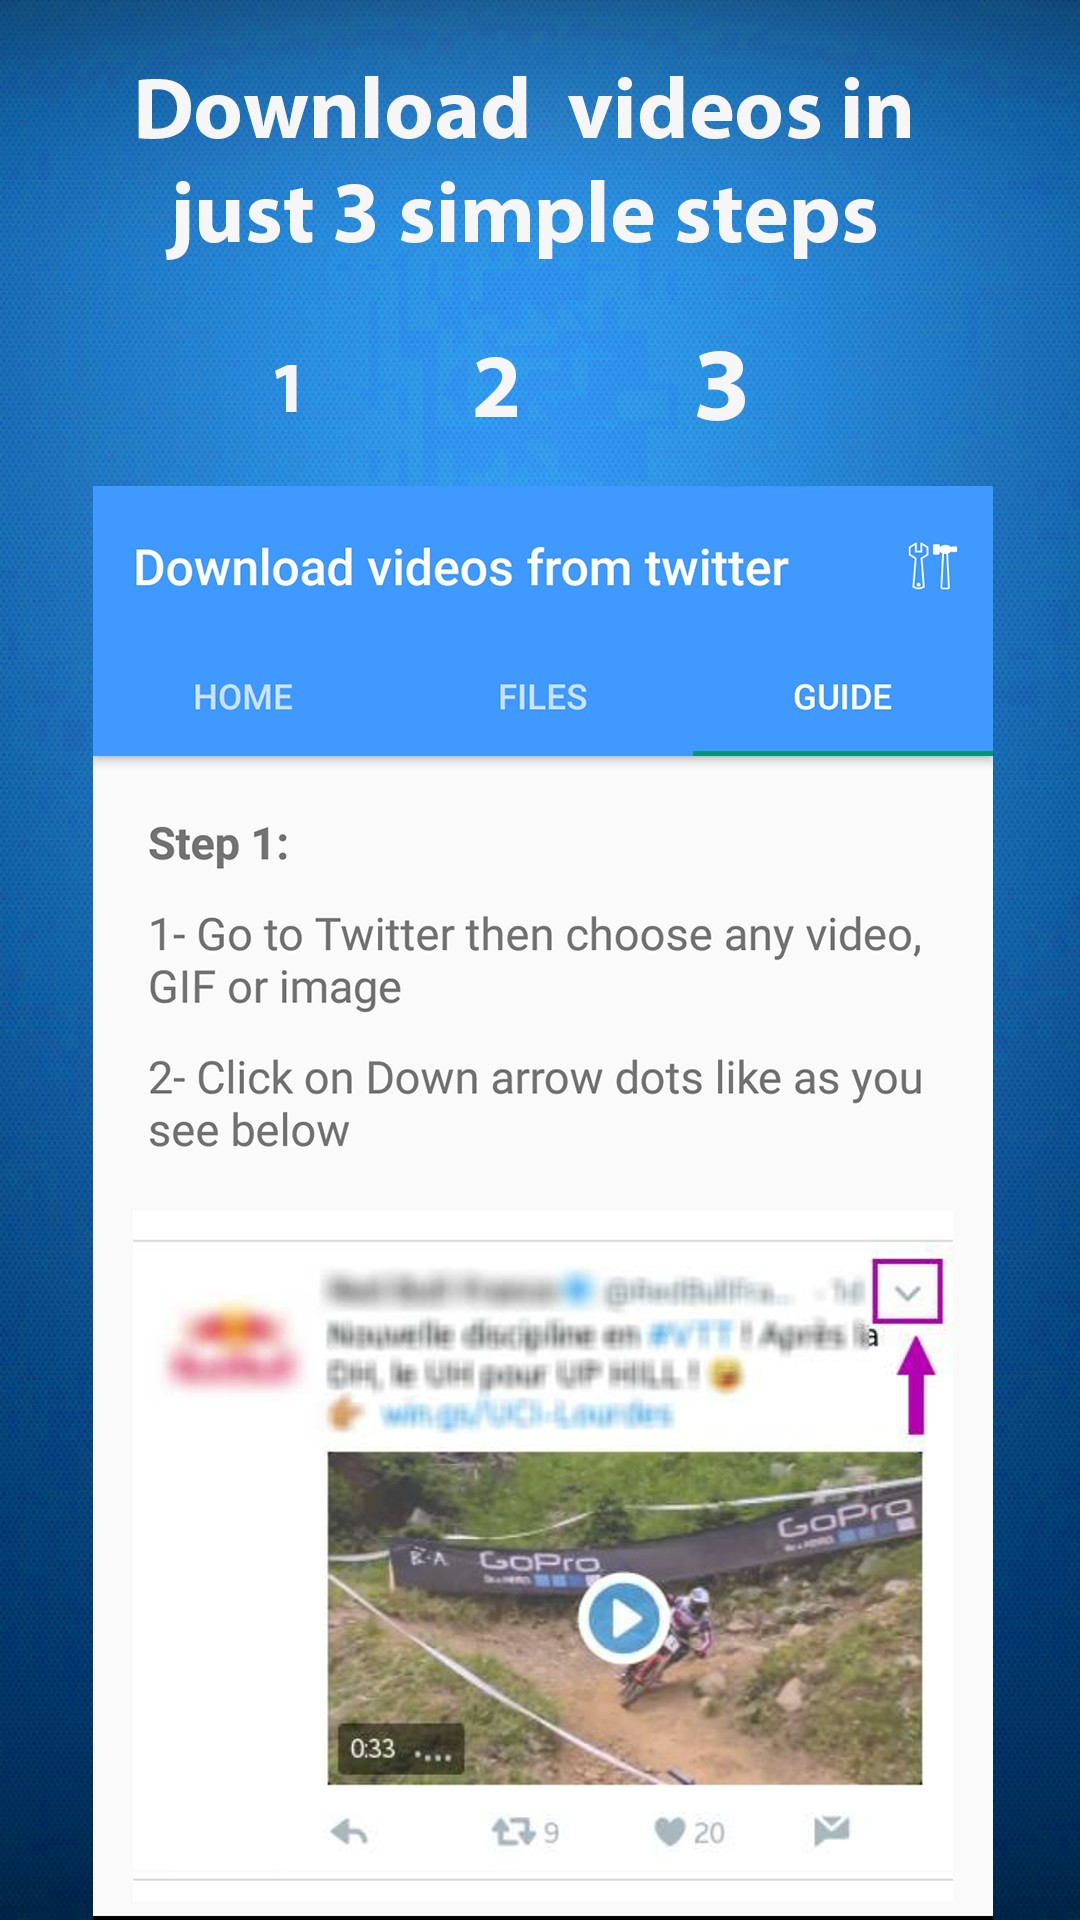 save twitter video download